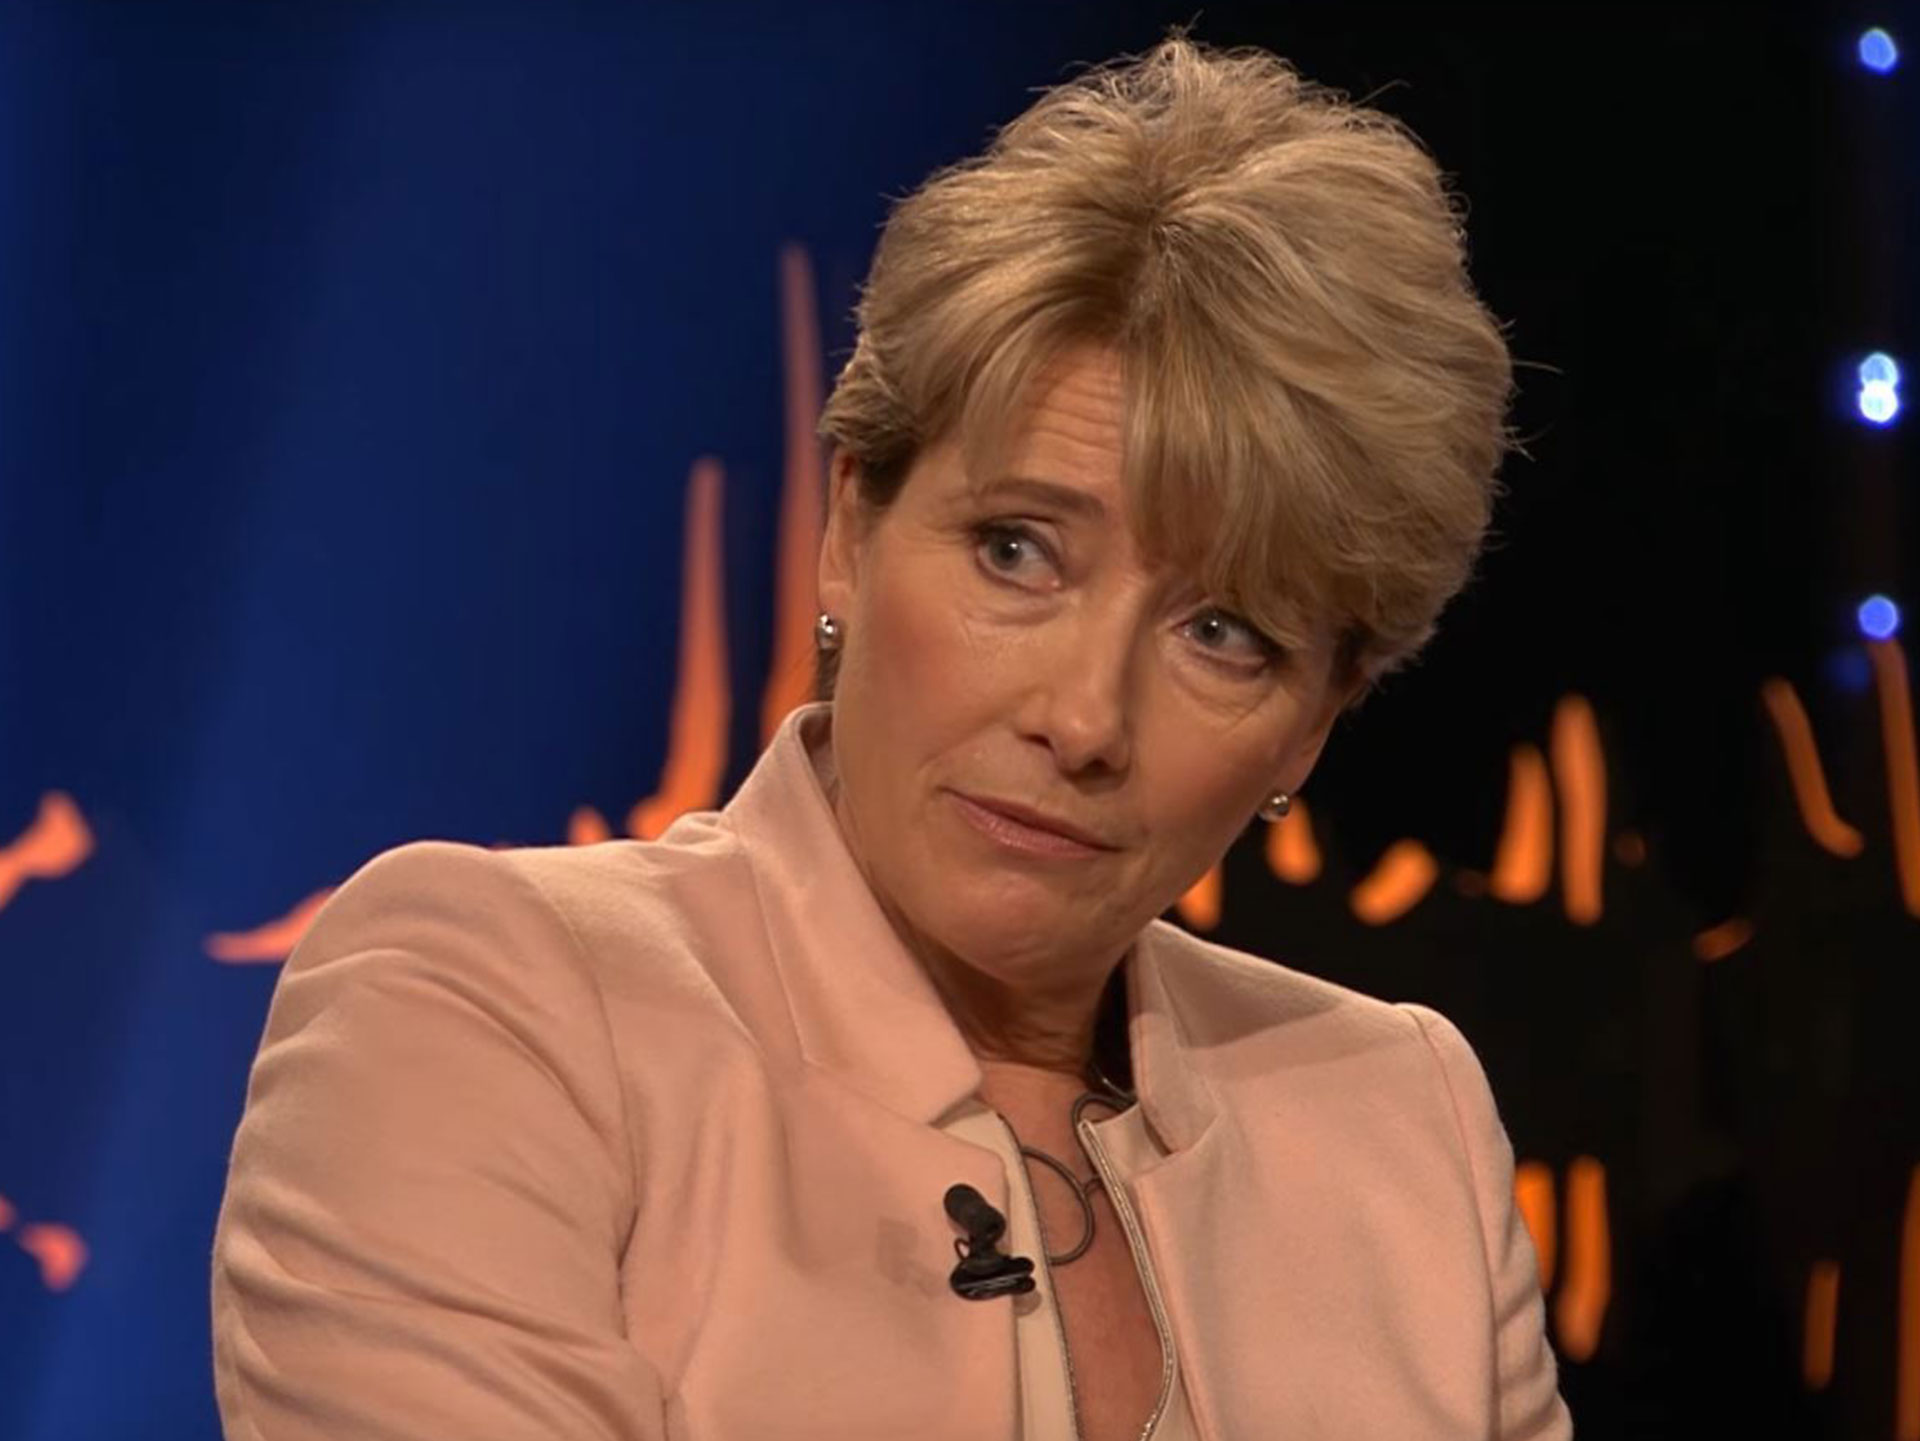 “It’s evil”: Emma Thompson threatened to quit a film after co-star asked to lose weight